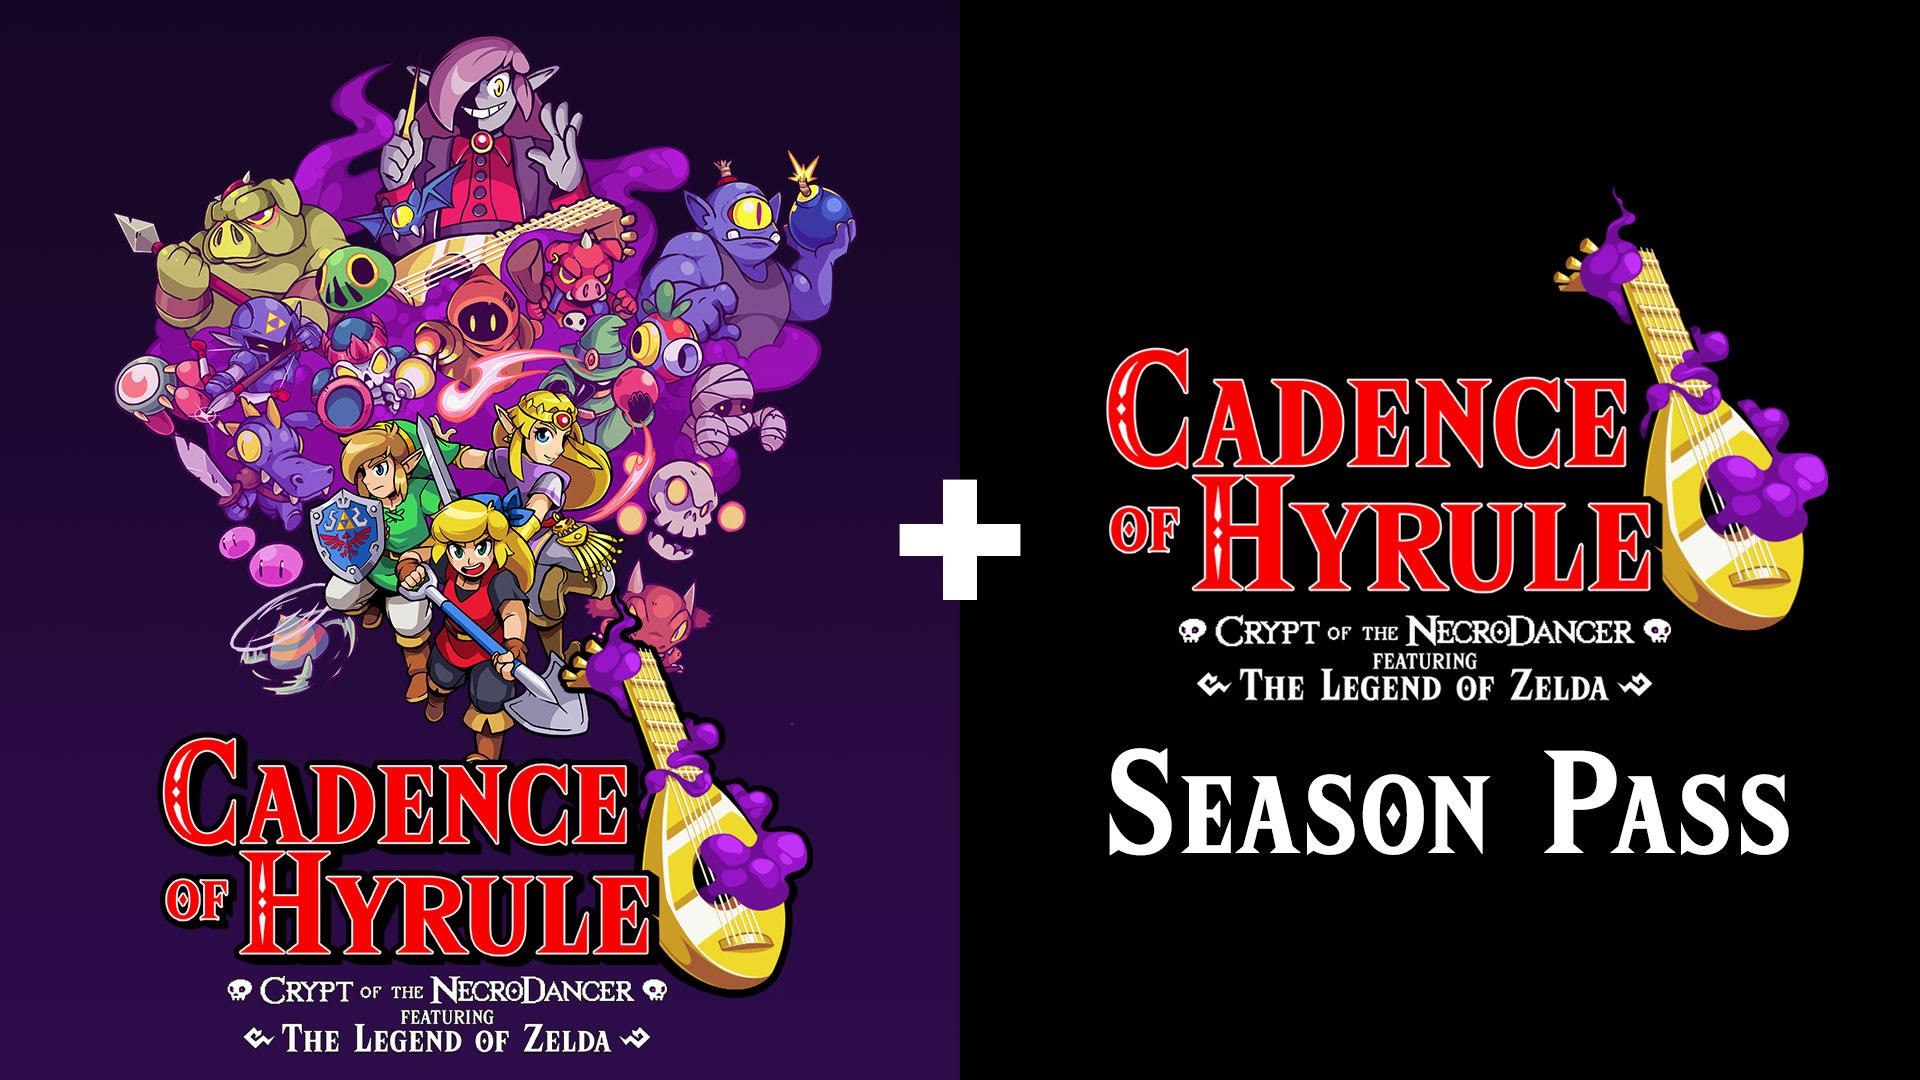 Cadence of Hyrule: Crypt of the NecroDancer featuring The Legend of Zelda + Cadence of Hyrule Season Pass